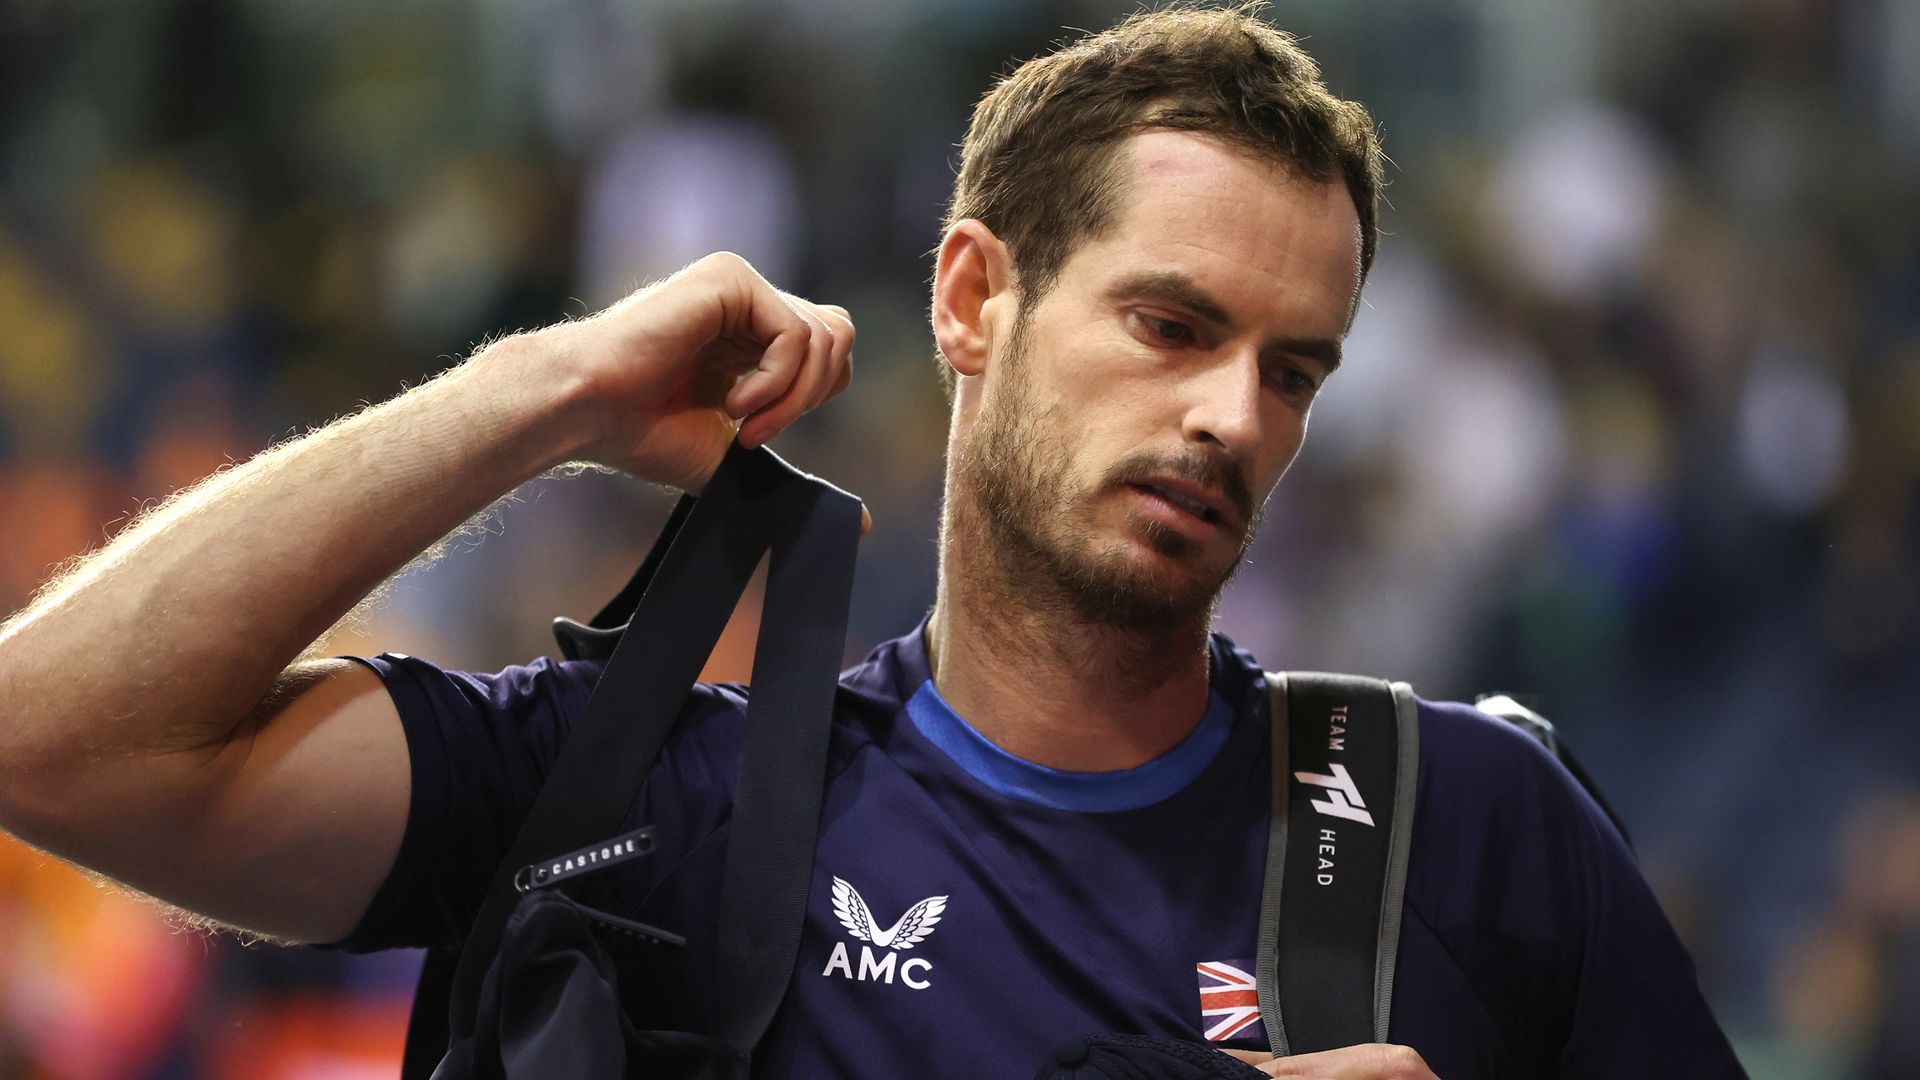 Great Britain out of Davis Cup after Netherlands defeat in Glasgow